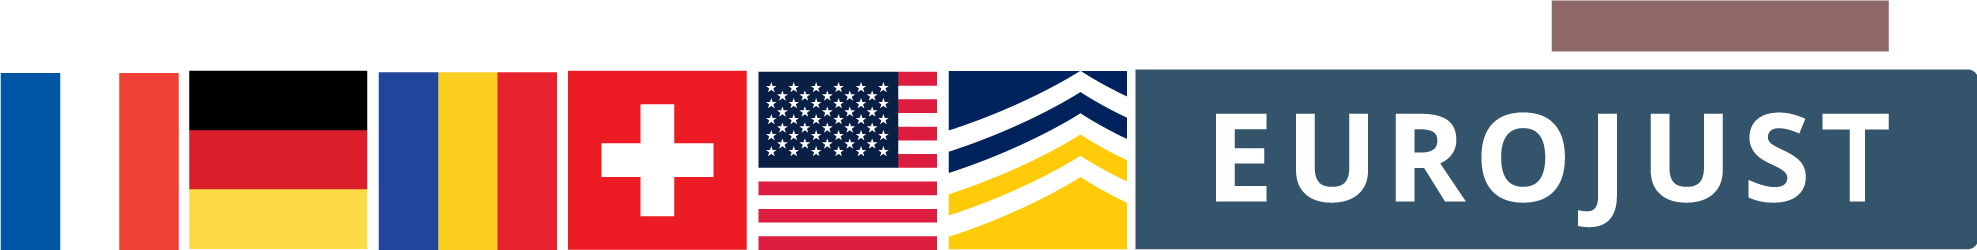 Flags of FR, DE, RO, CH, US logos of Europol and Eurojust